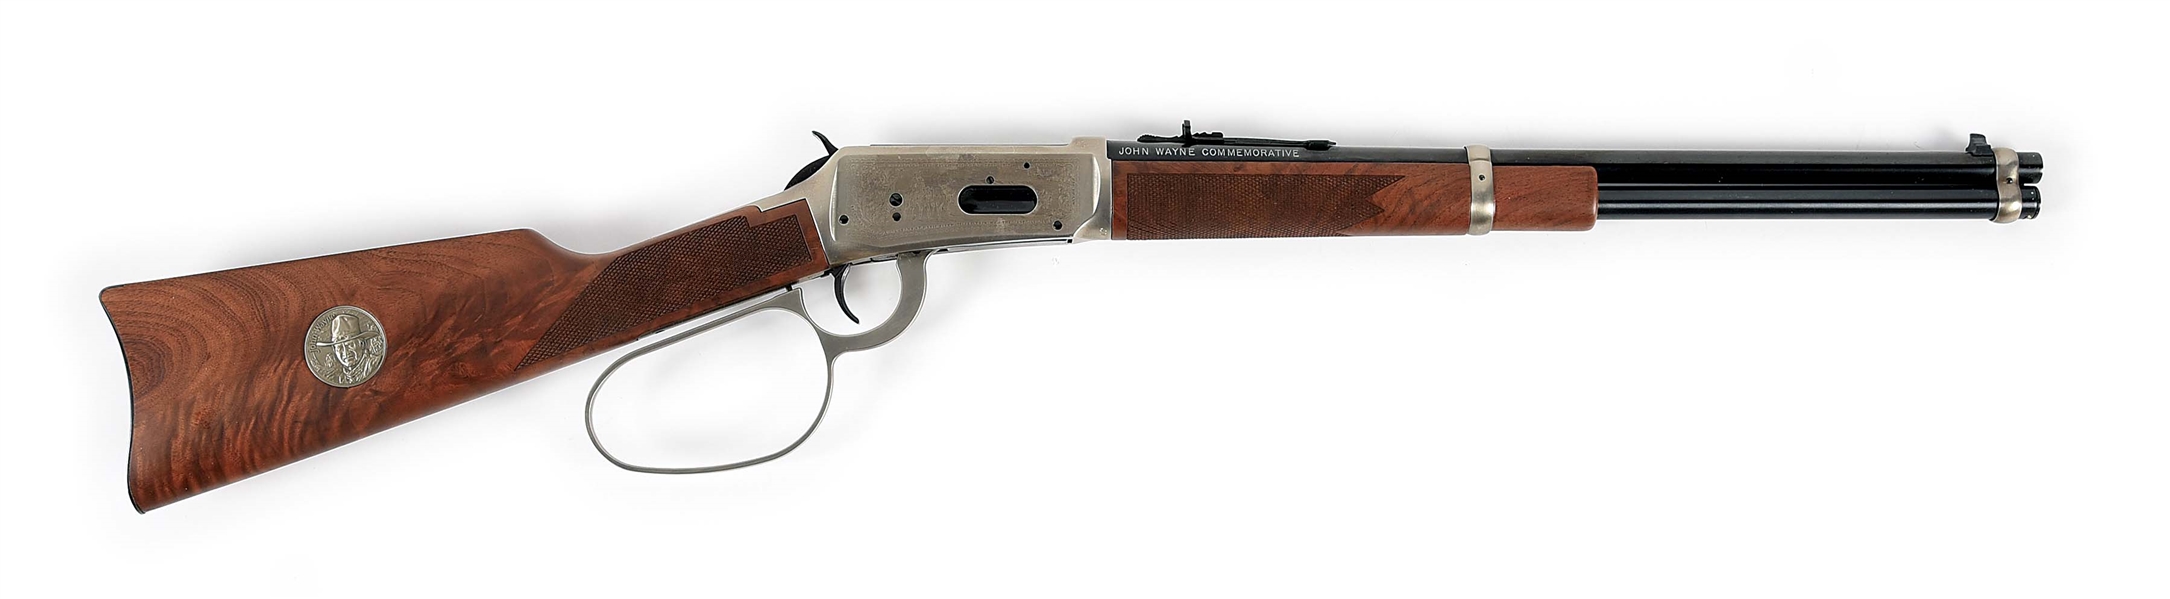 (M) WINCHESTER MODEL 1894 CARBINE JOHN WAYNE COMMEMORATIVE LEVER ACTION RIFLE WITH WALL MOUNT AND SCABBARD 